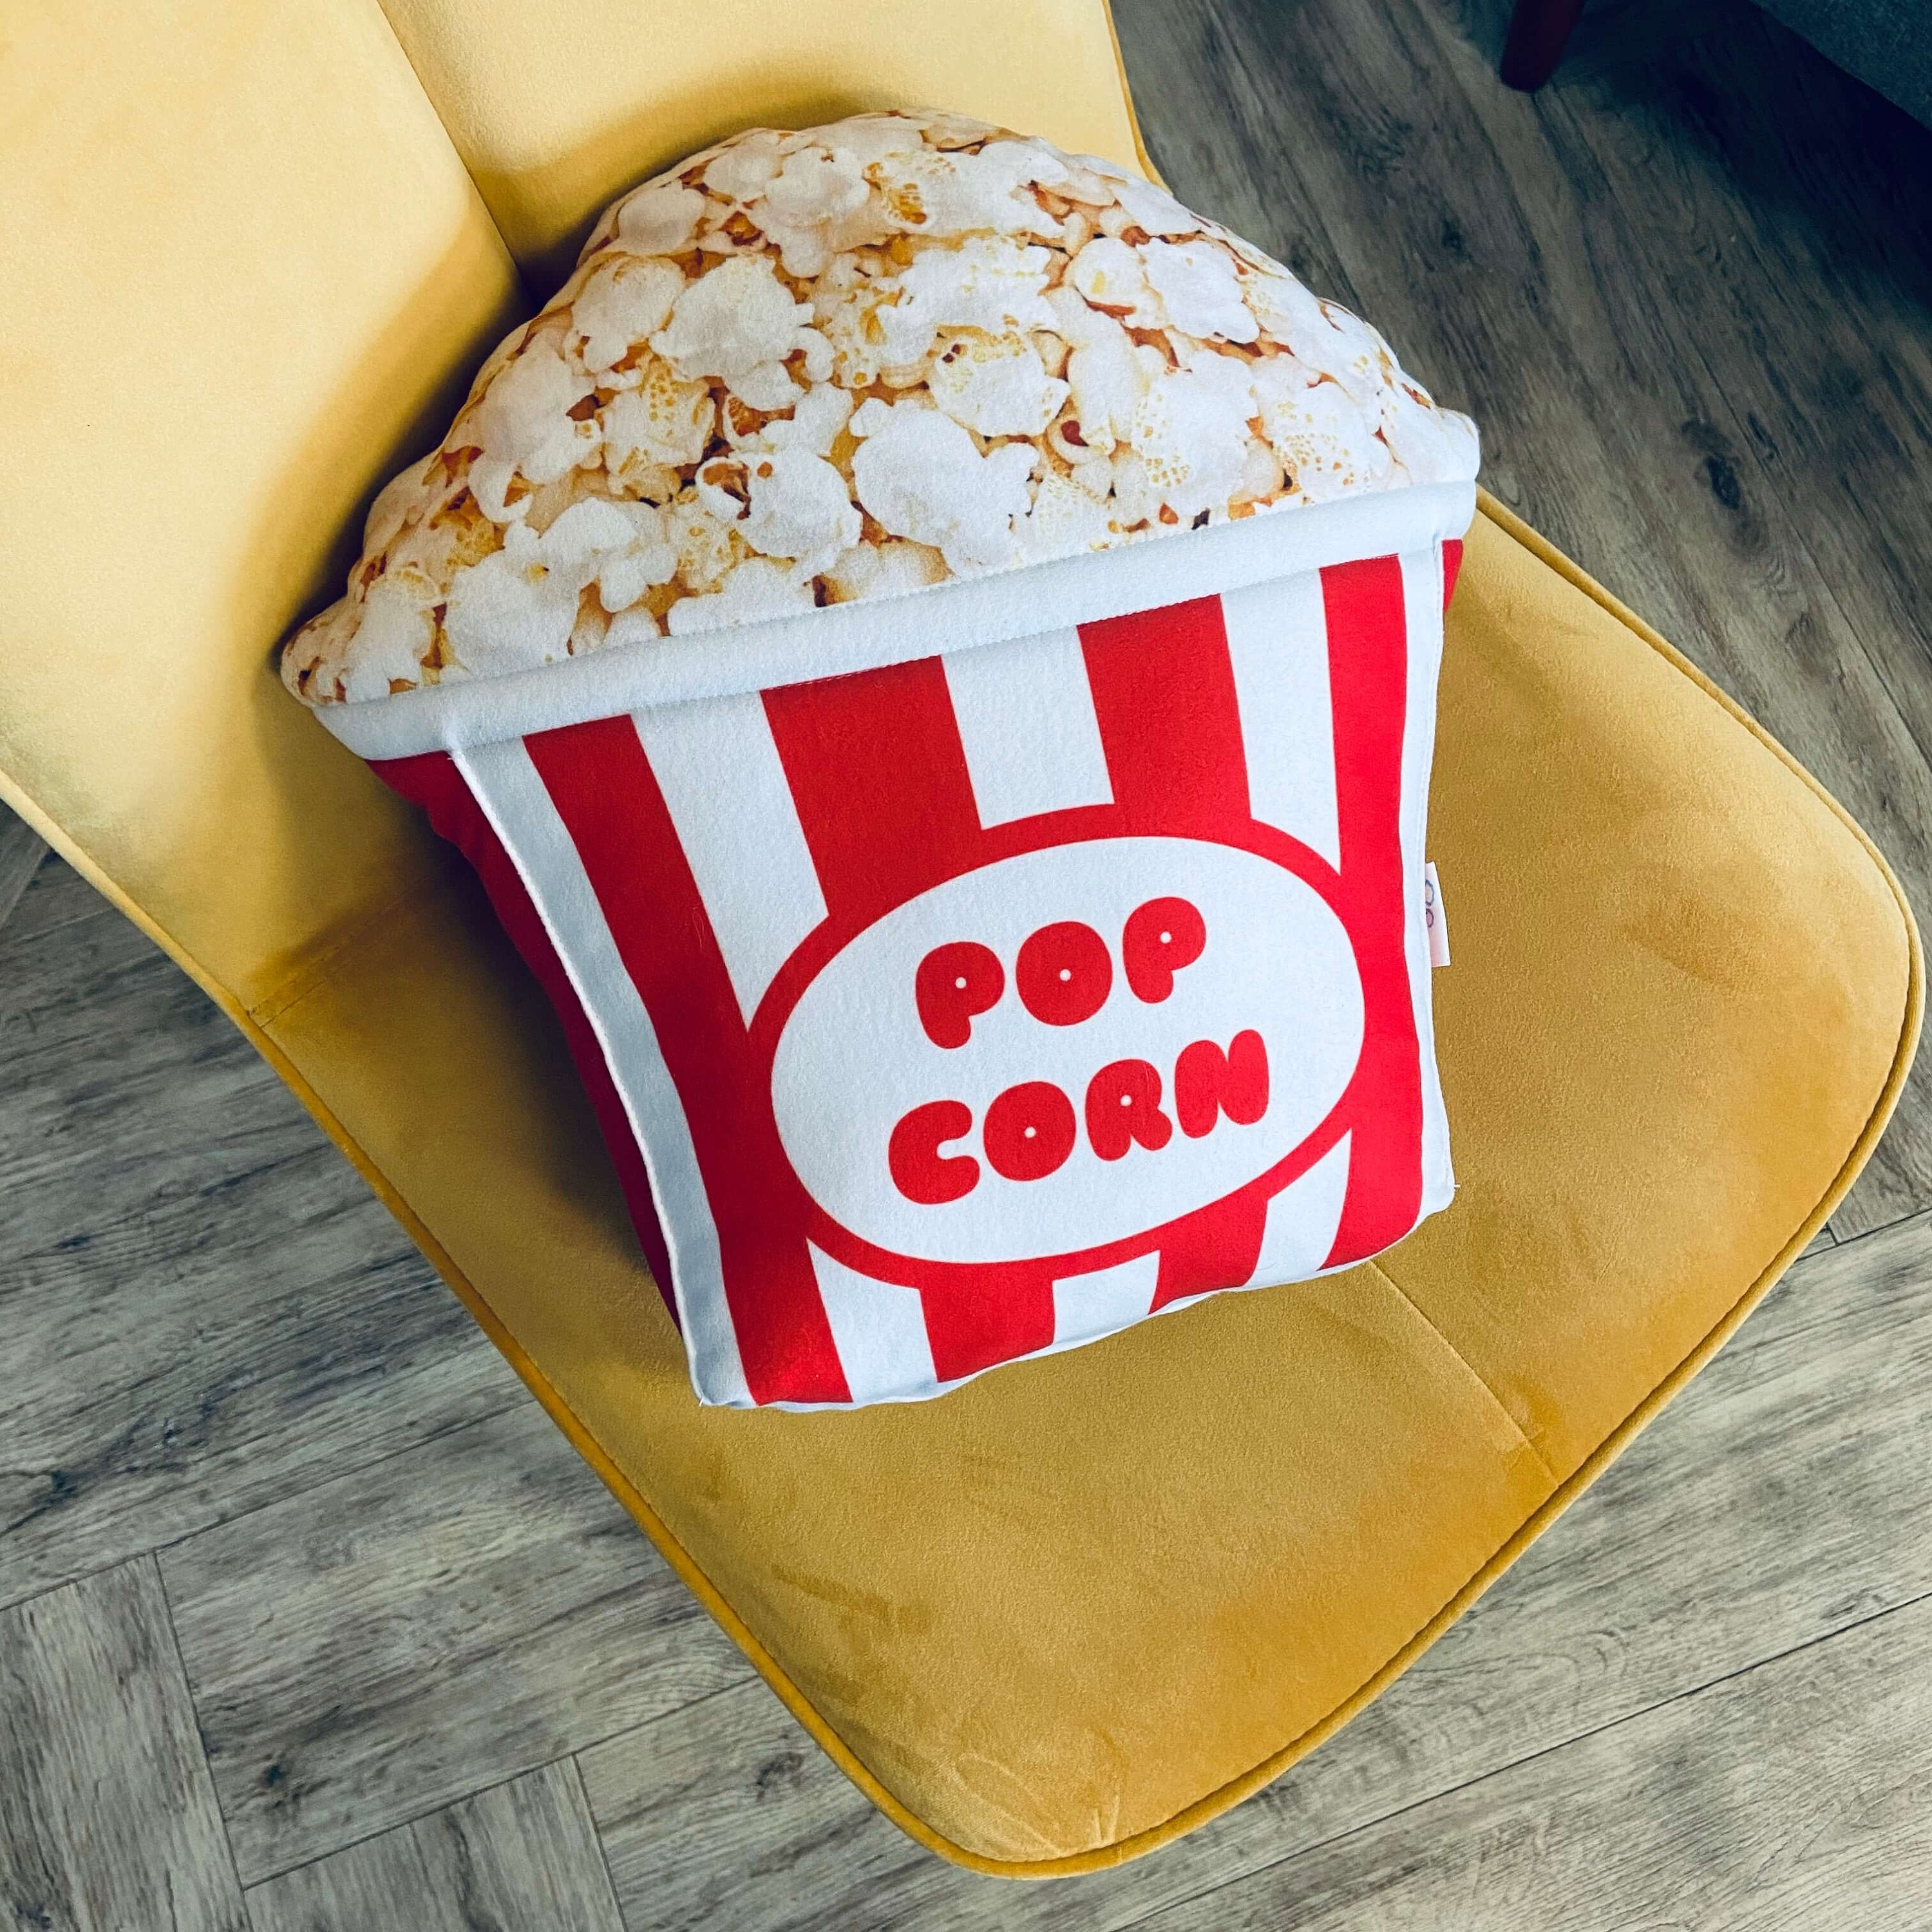 POPCO - Ordering a box of feel-good pops for home delivery has